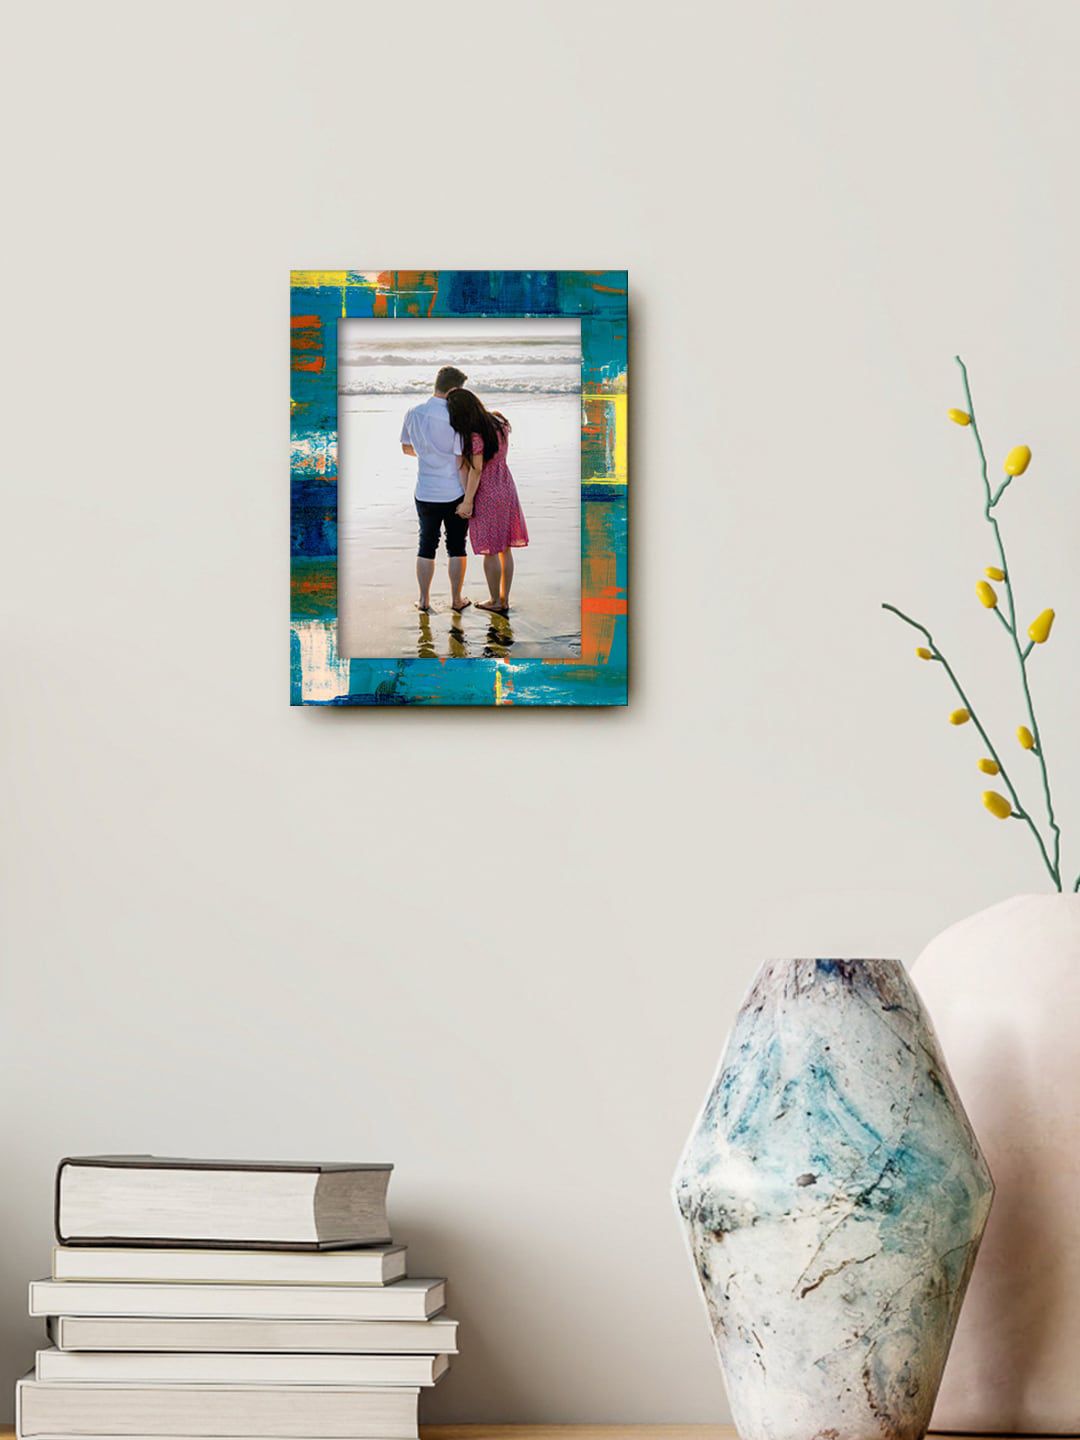 999Store Unisex Multicolor Graphic Printed MDF Wall Photo Frame Price in India